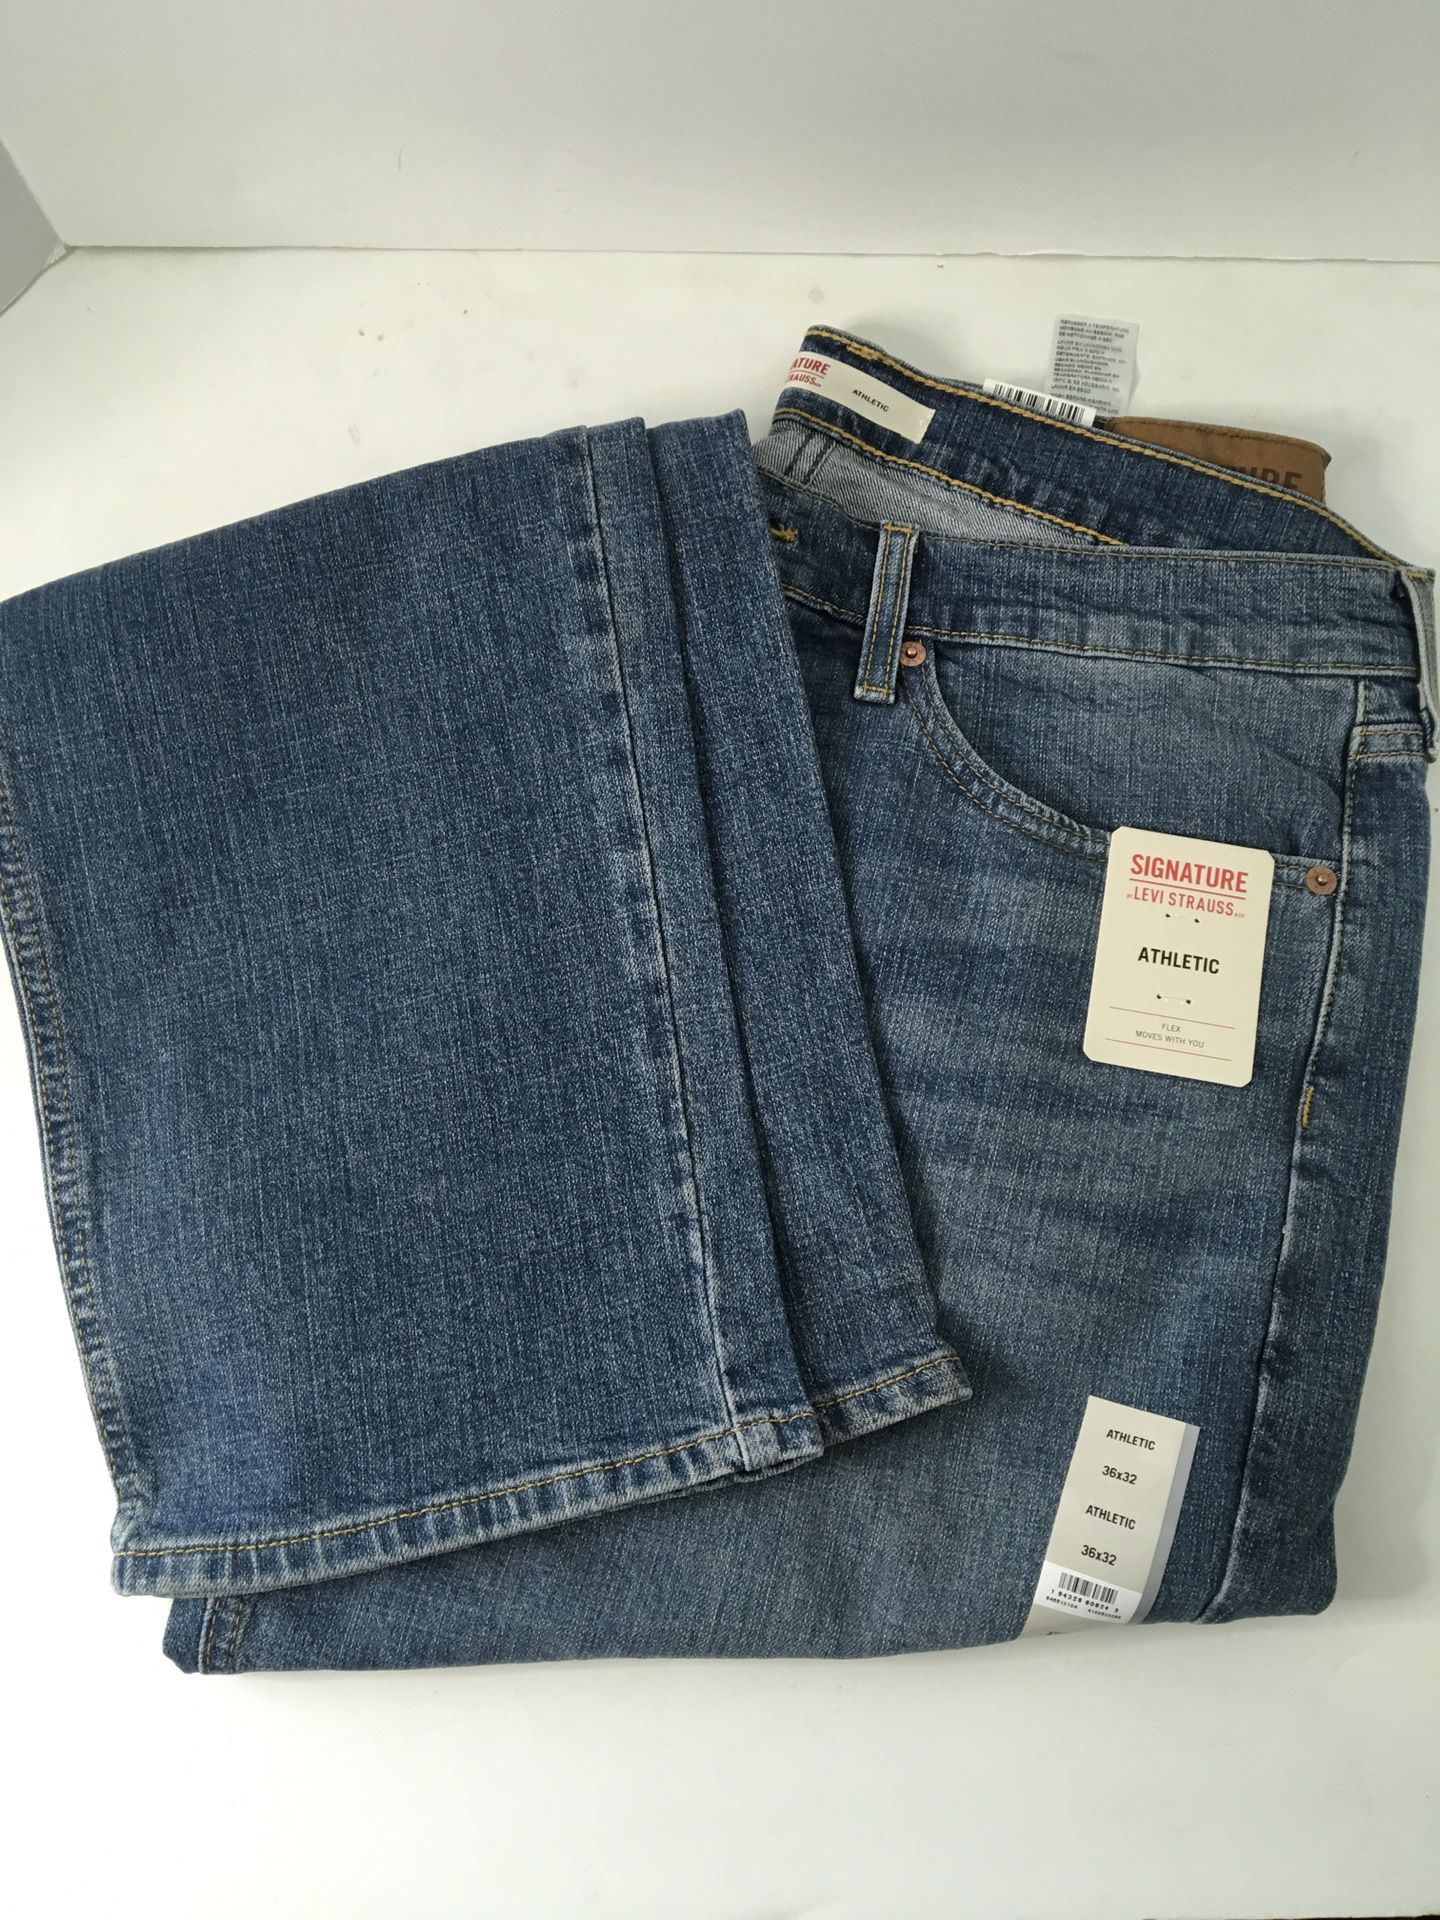 New Mens 36x32 Signature Levi Strauss Athletic Fir Jeans for Sale in La  Marque, TX - OfferUp